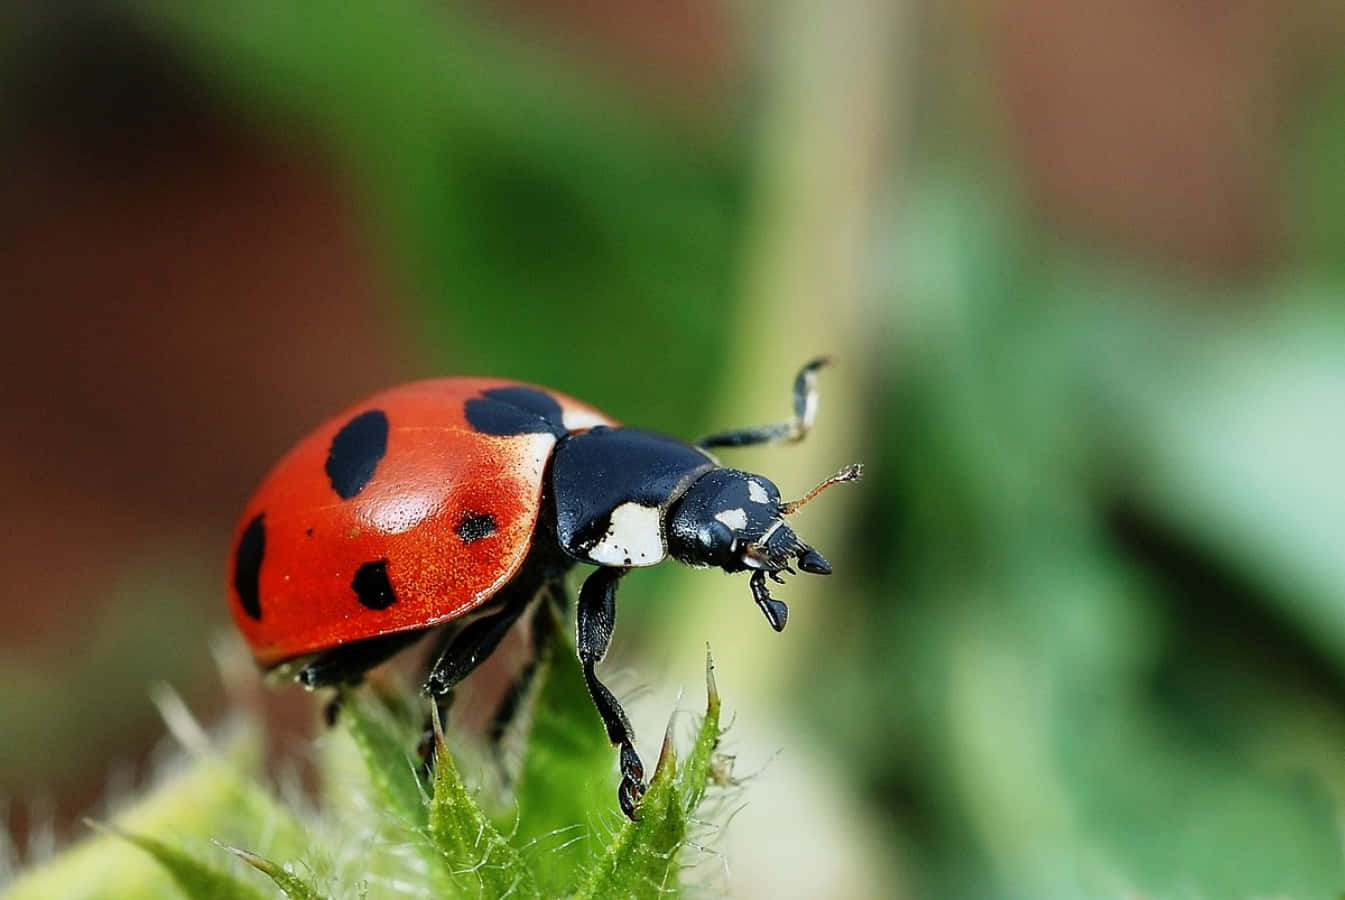 Cute Ladybug Cool Nature Picture